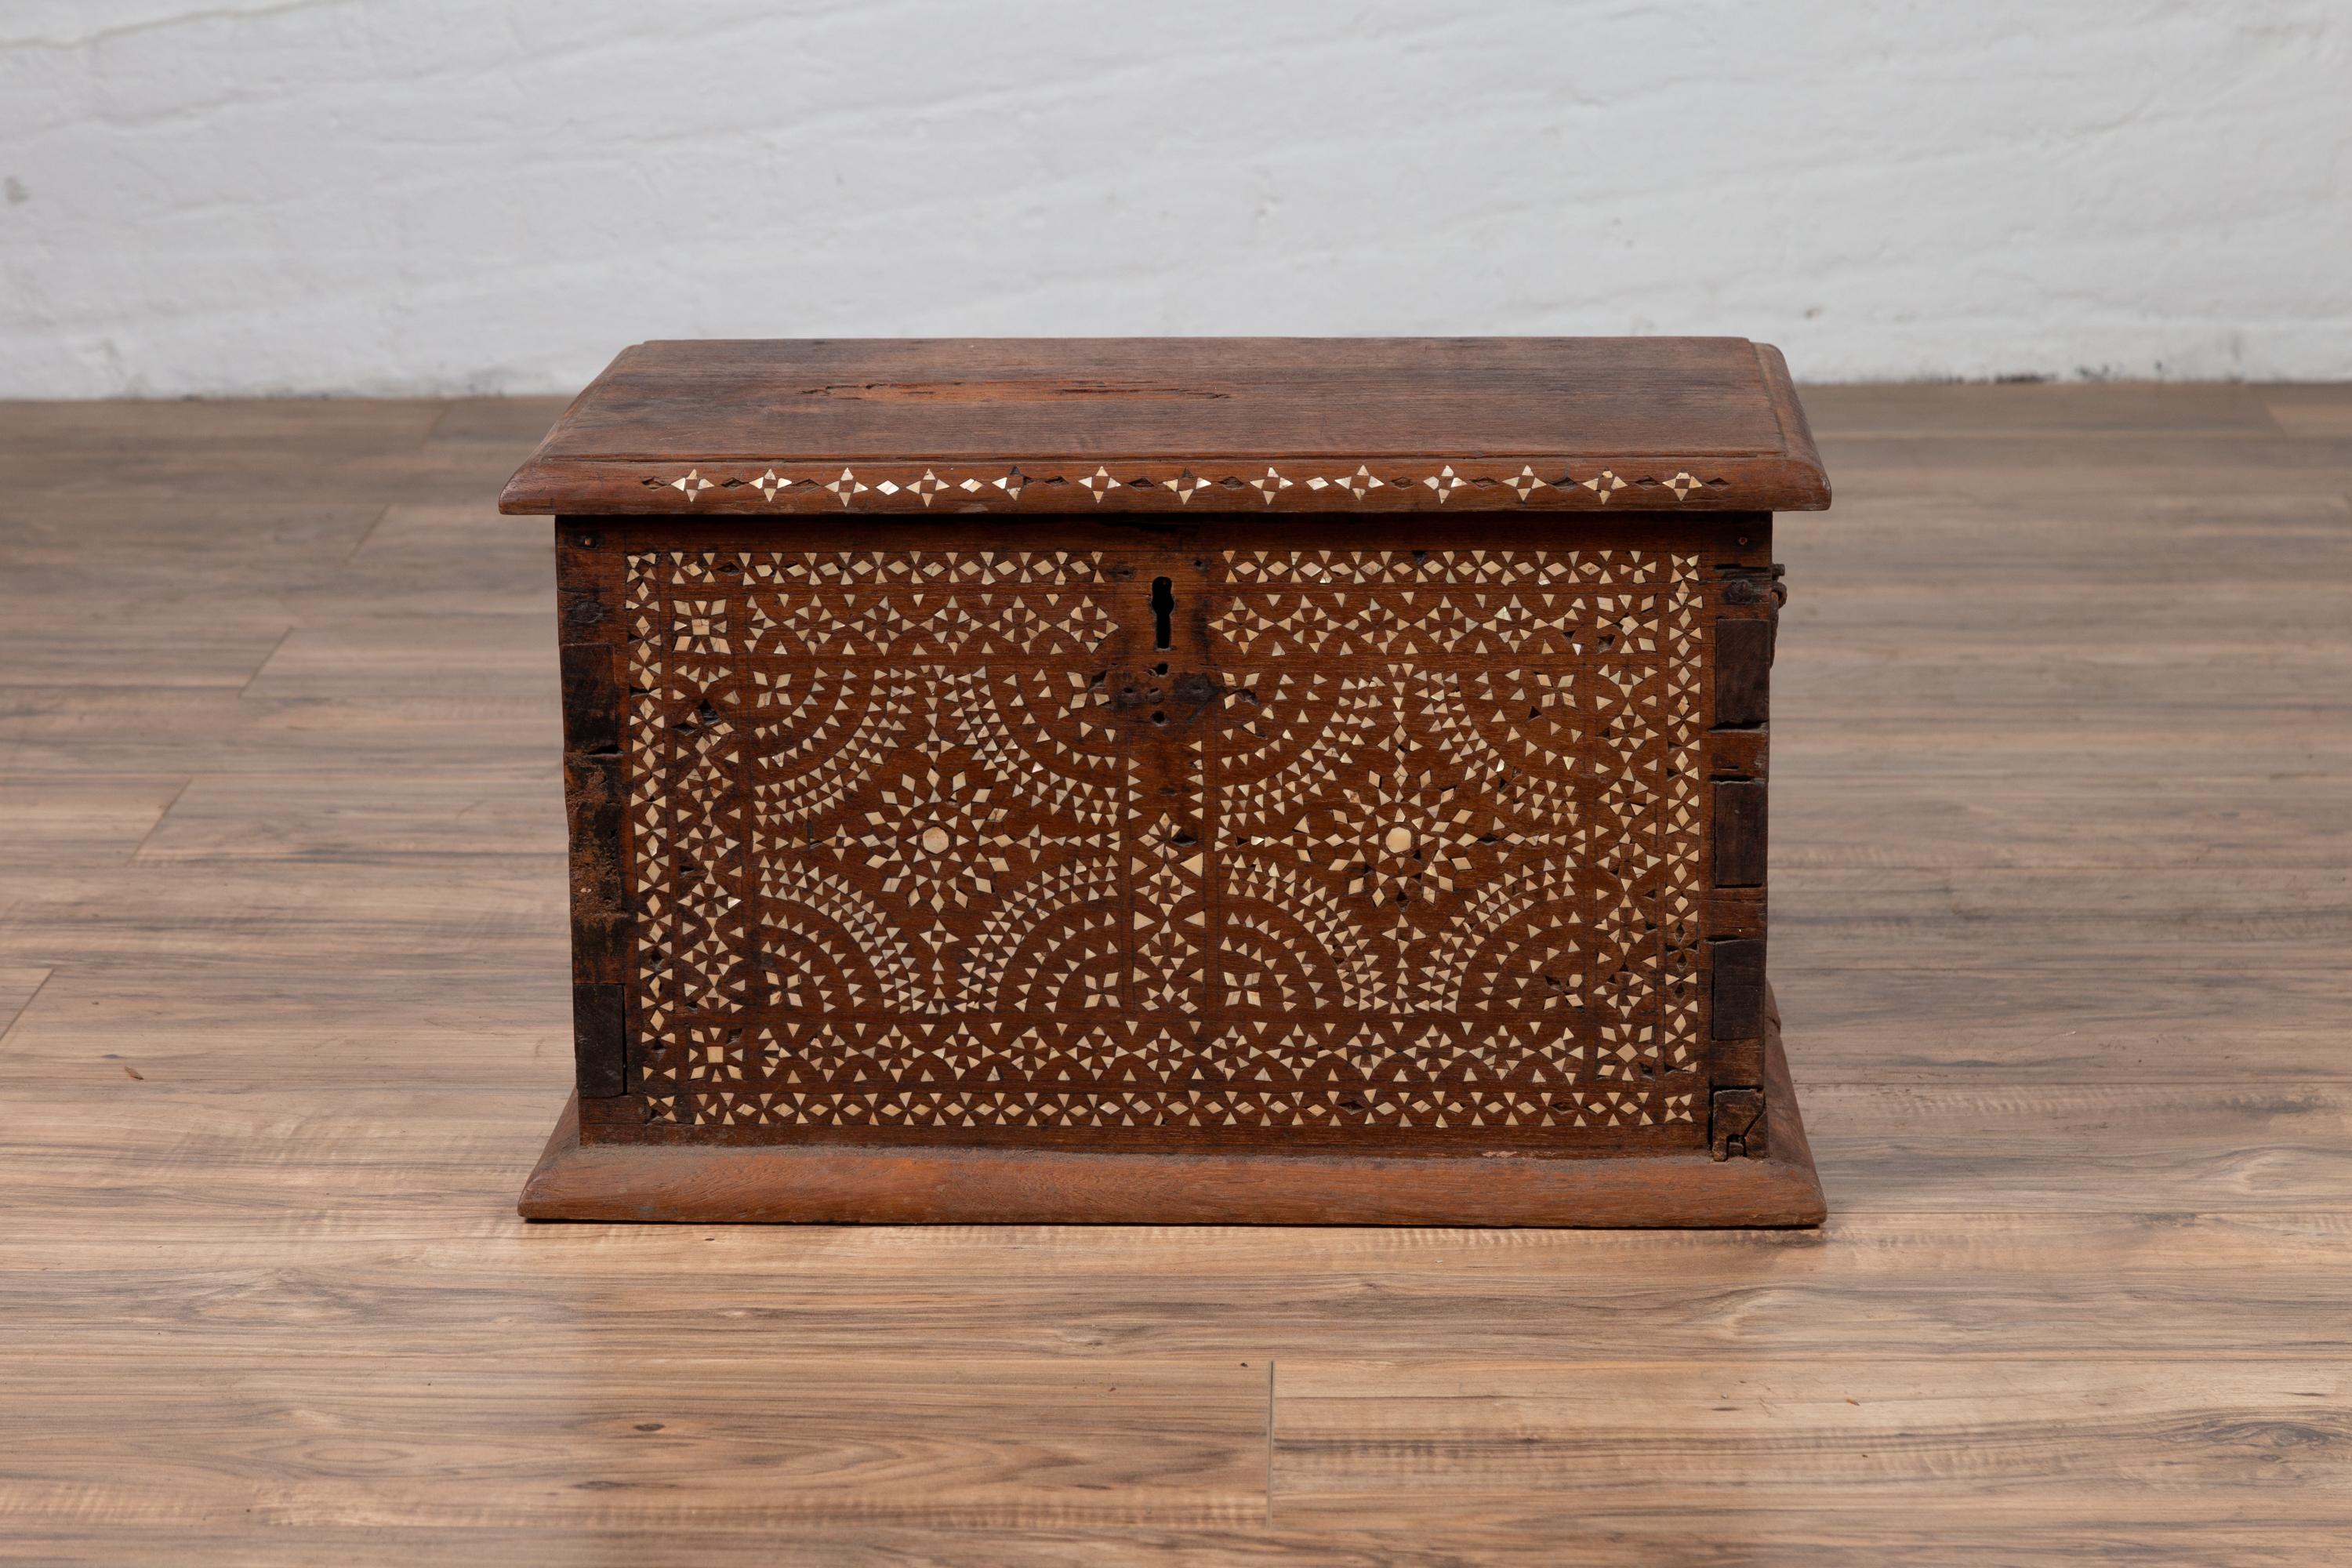 A vintage Javanese wooden trunk from the mid-20th century, with mother of pearl inlay. Born on the Island of Java during the midcentury period, this charming wooden trunk features a rectangular lid with beveled edges sitting above a beautiful body